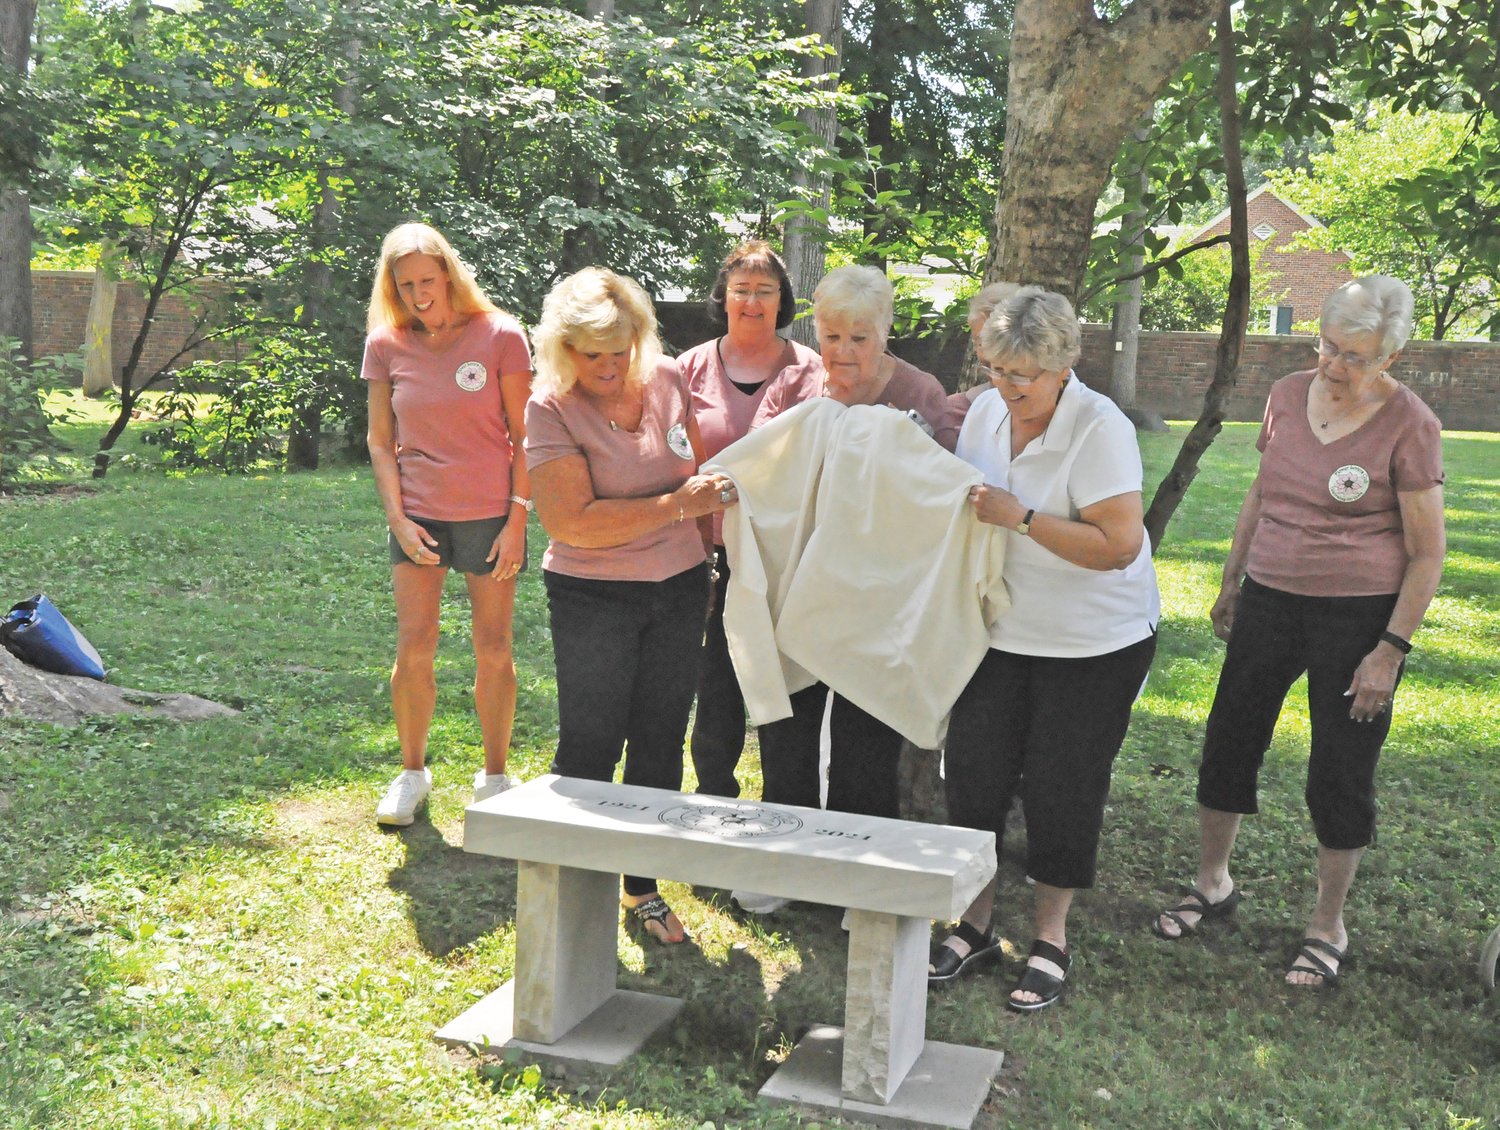 Flower Lovers Garden Club members unveil a bench dedicated to the City of Crawfordsville in honor of the club’s 100th anniversary on the grounds of the General Lew Wallace Study & Museum on Wednesday. The bench was made by Young & Company Rock Art & Design.